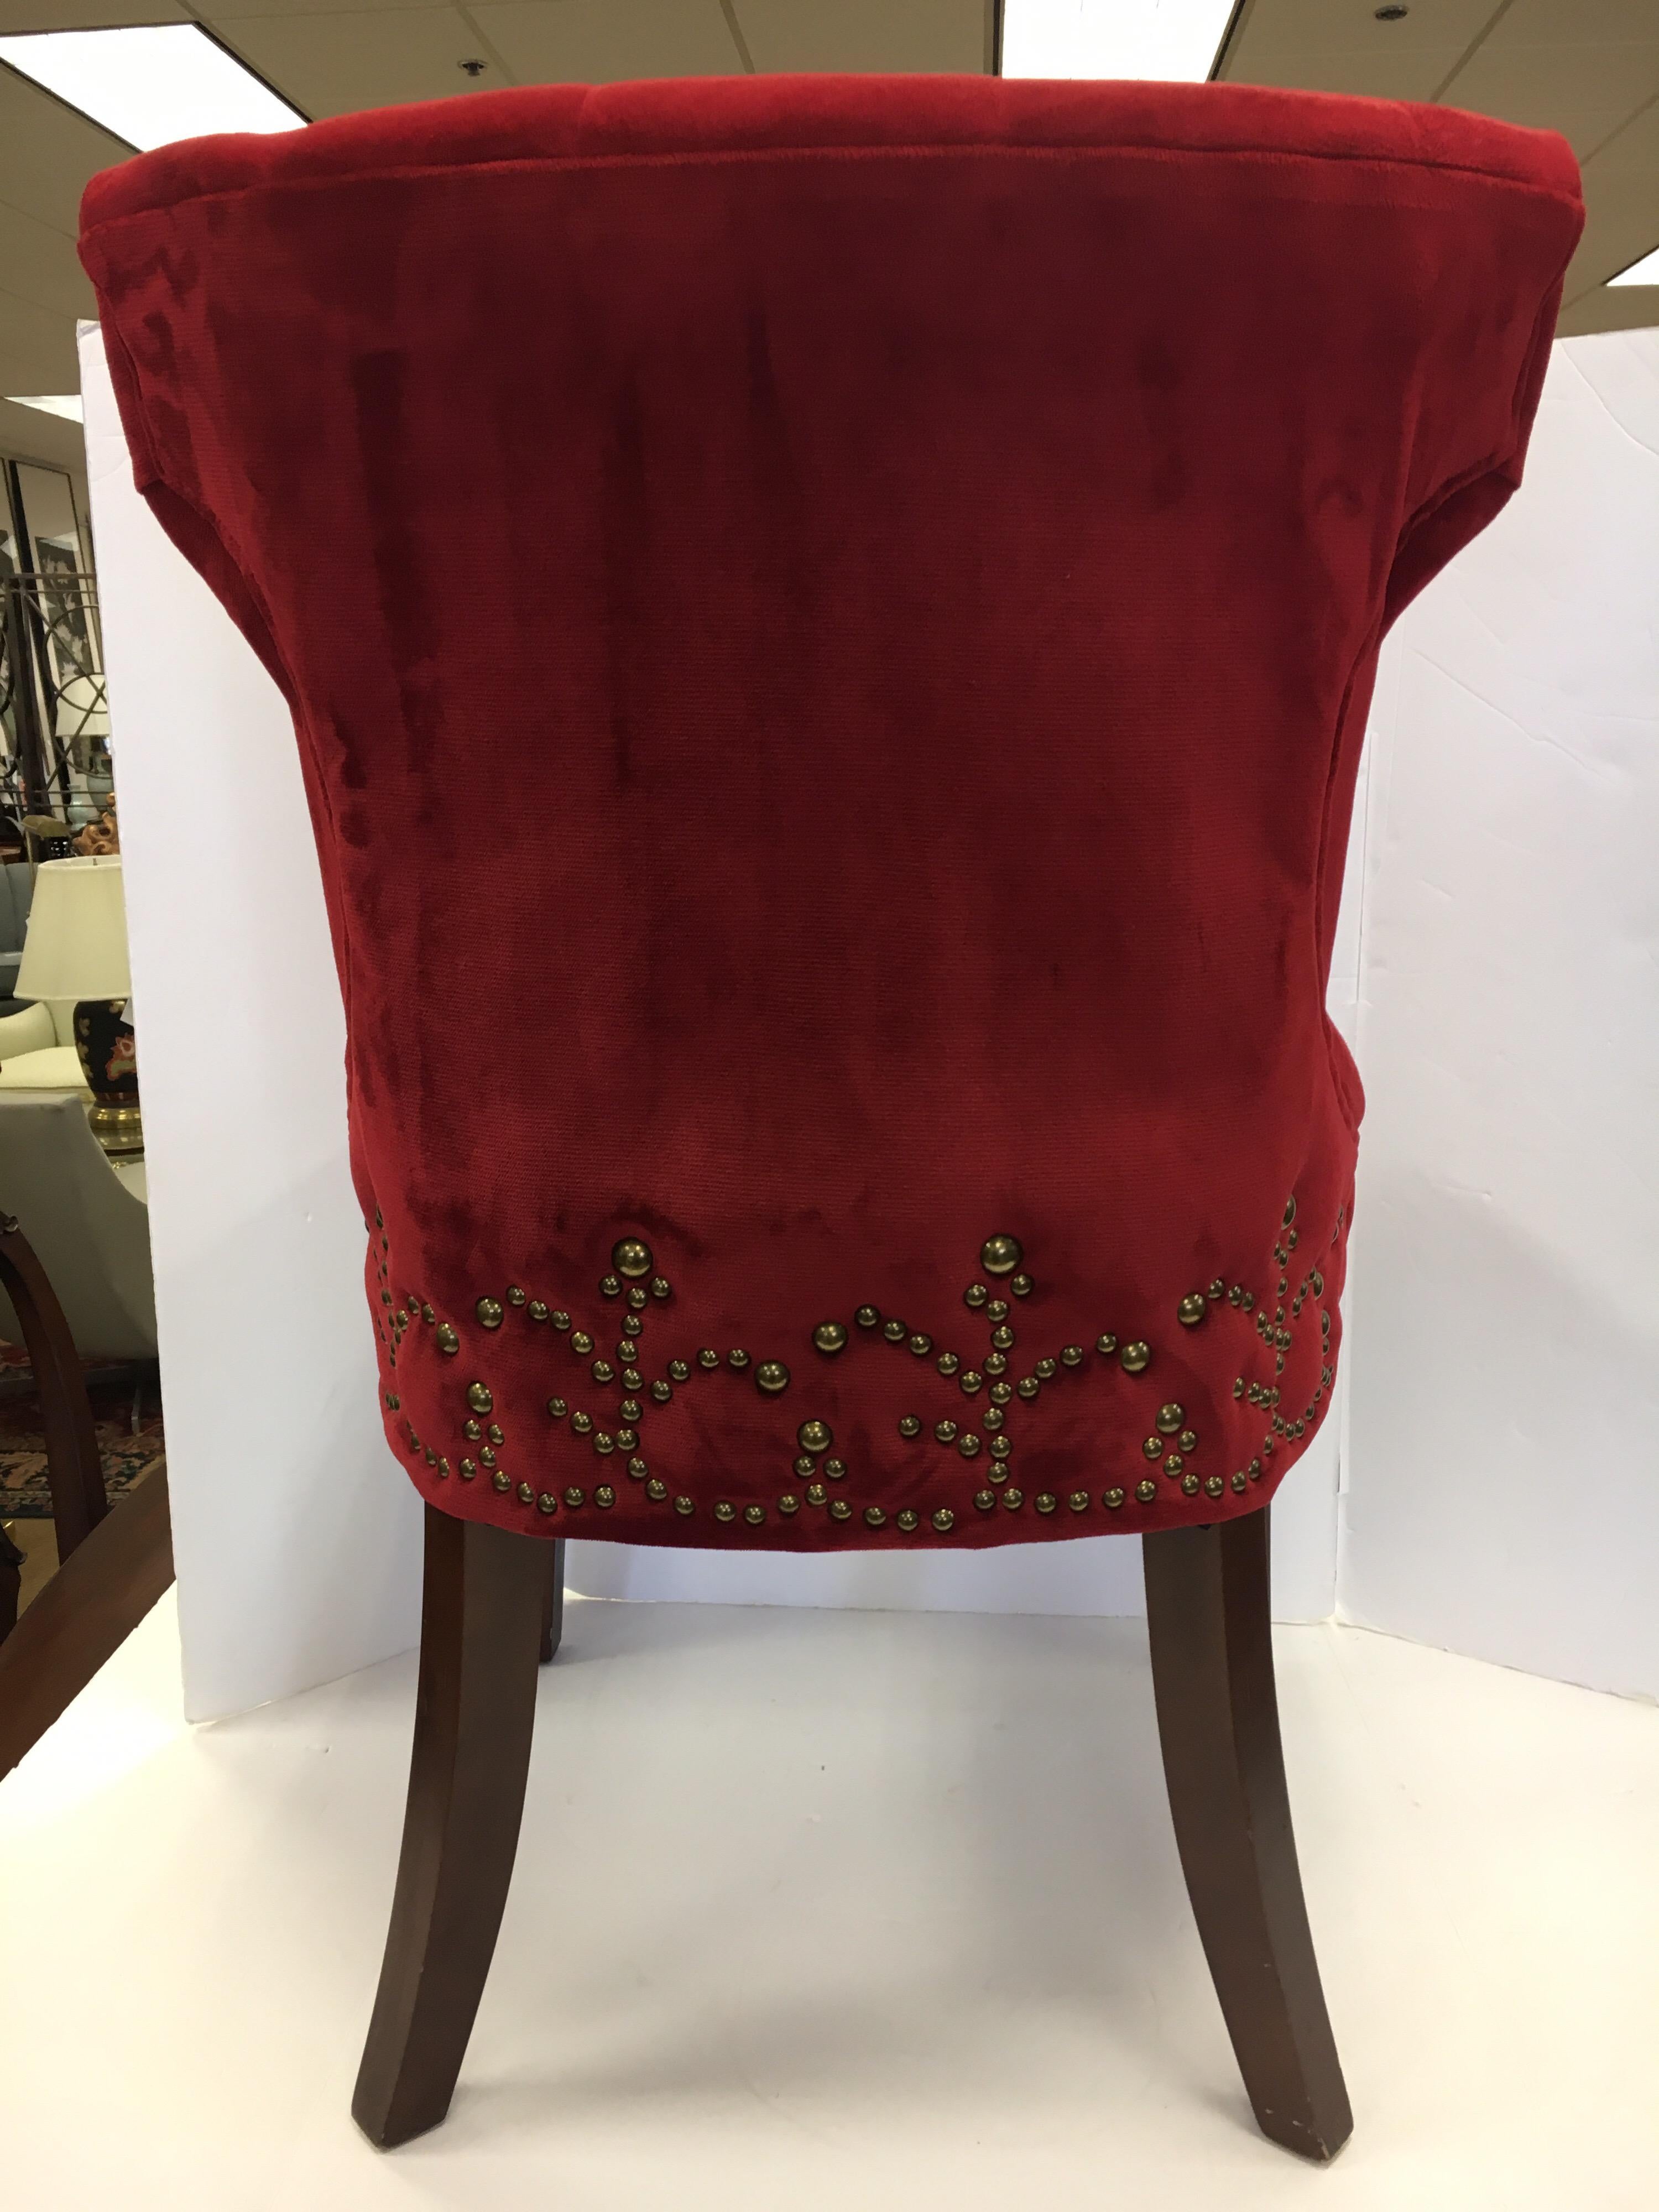 Stunning red cotton fabric upholstery on tufted dining chairs, a pair with one of a kind nailhead pattern throughout which looks like a work of art.